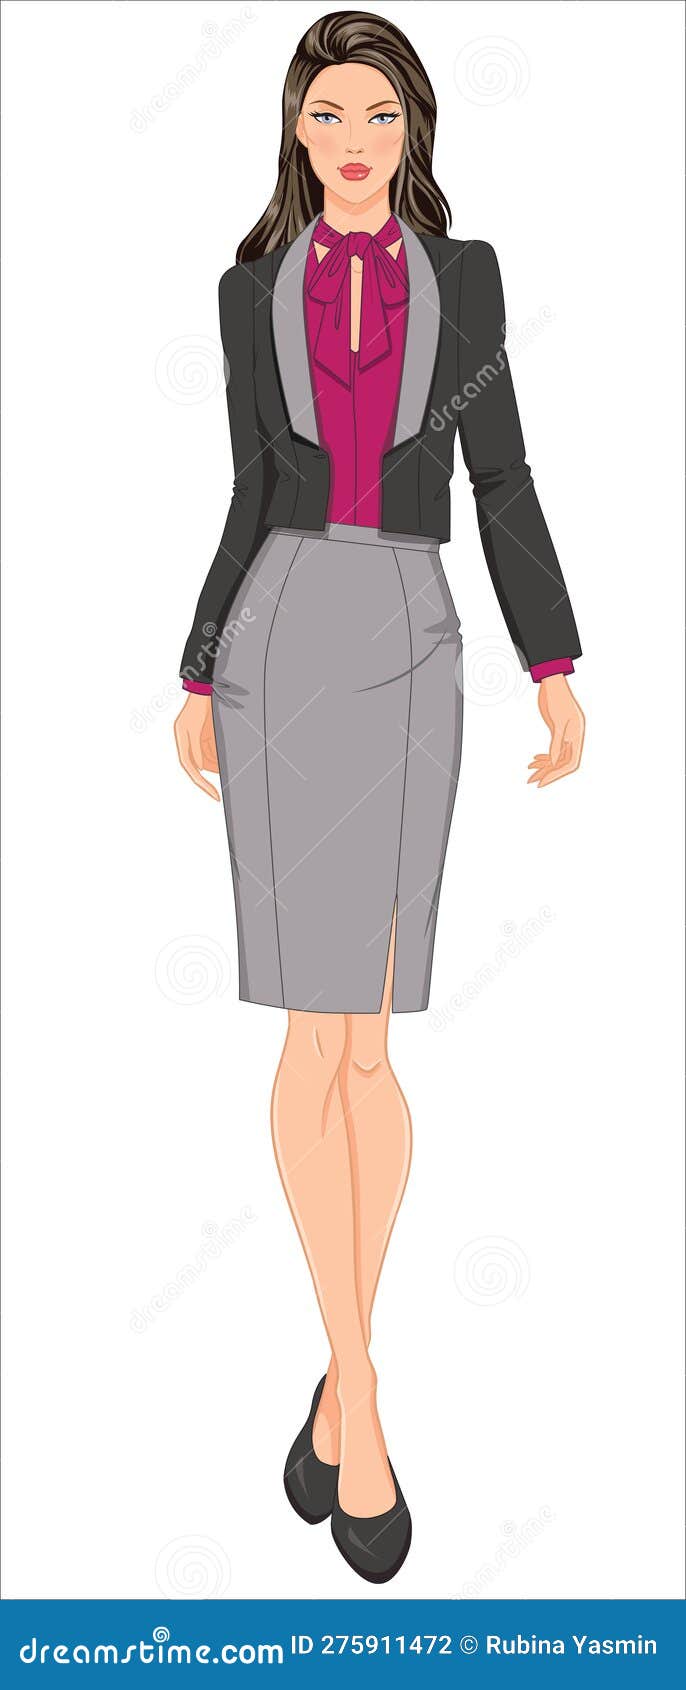 women croquis in smart uniform blazer with pencil skirt and pussy bow top